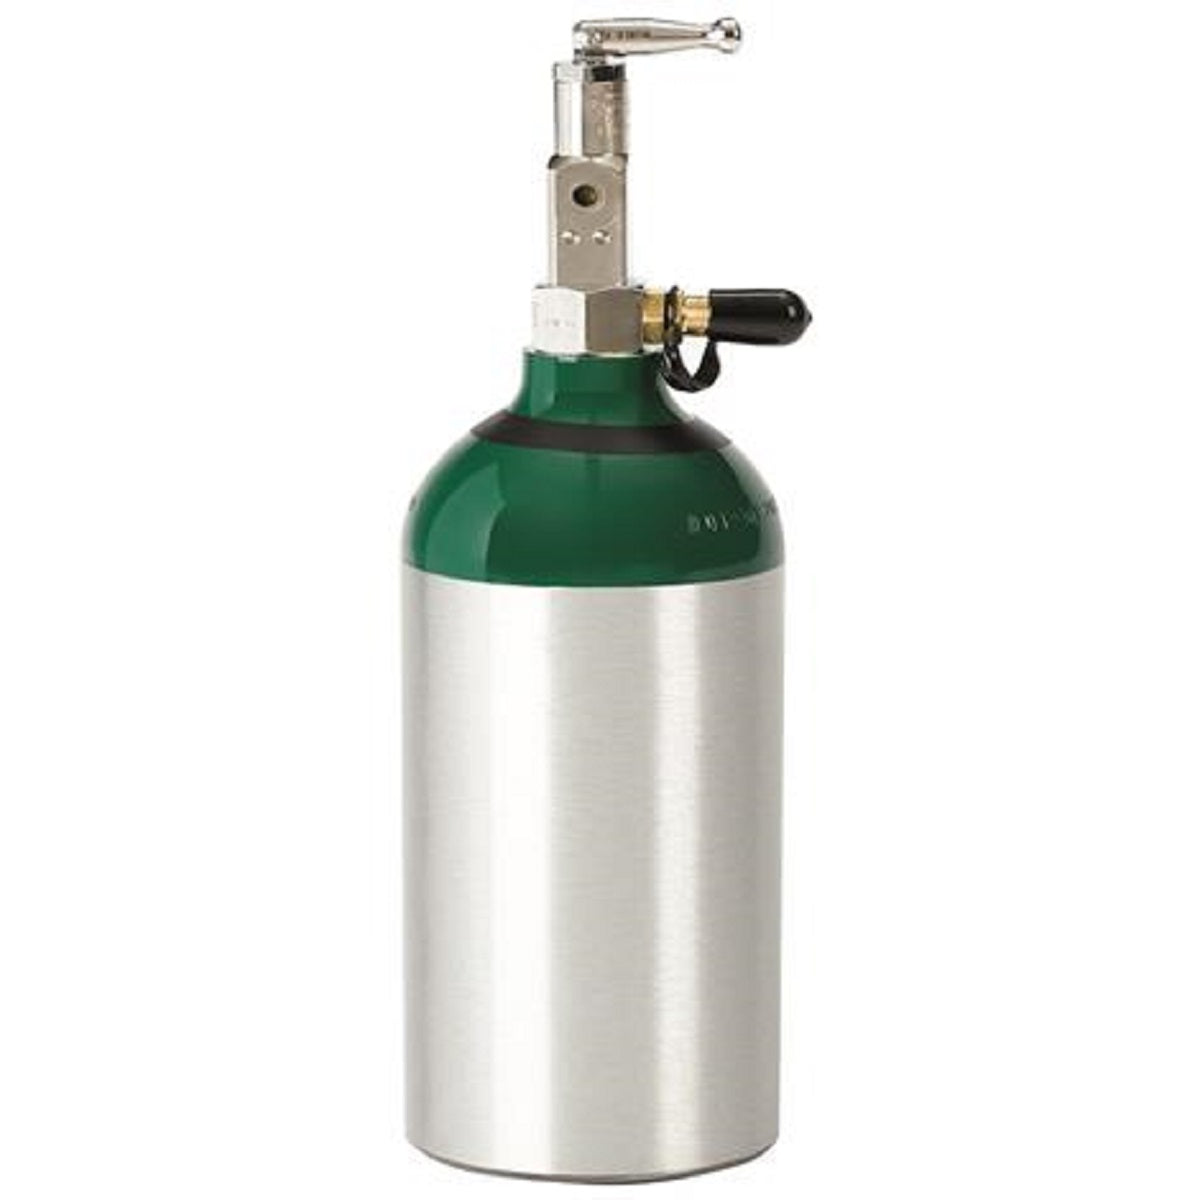 Invacare Homefill Oxygen Cylinder without Regulator